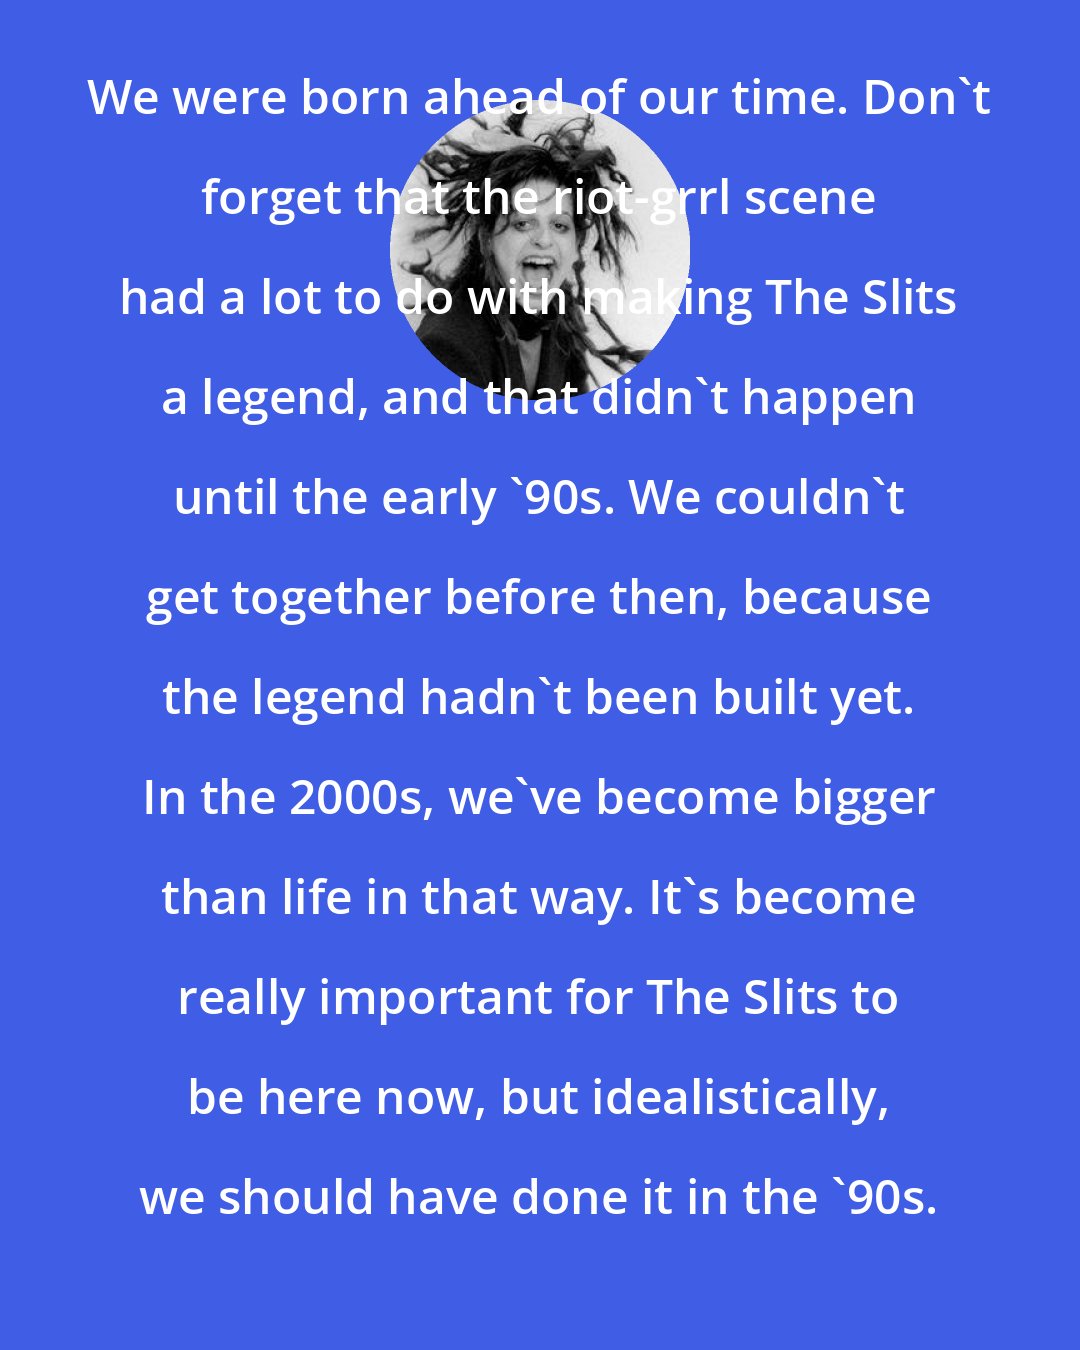 Ari Up: We were born ahead of our time. Don't forget that the riot-grrl scene had a lot to do with making The Slits a legend, and that didn't happen until the early '90s. We couldn't get together before then, because the legend hadn't been built yet. In the 2000s, we've become bigger than life in that way. It's become really important for The Slits to be here now, but idealistically, we should have done it in the '90s.